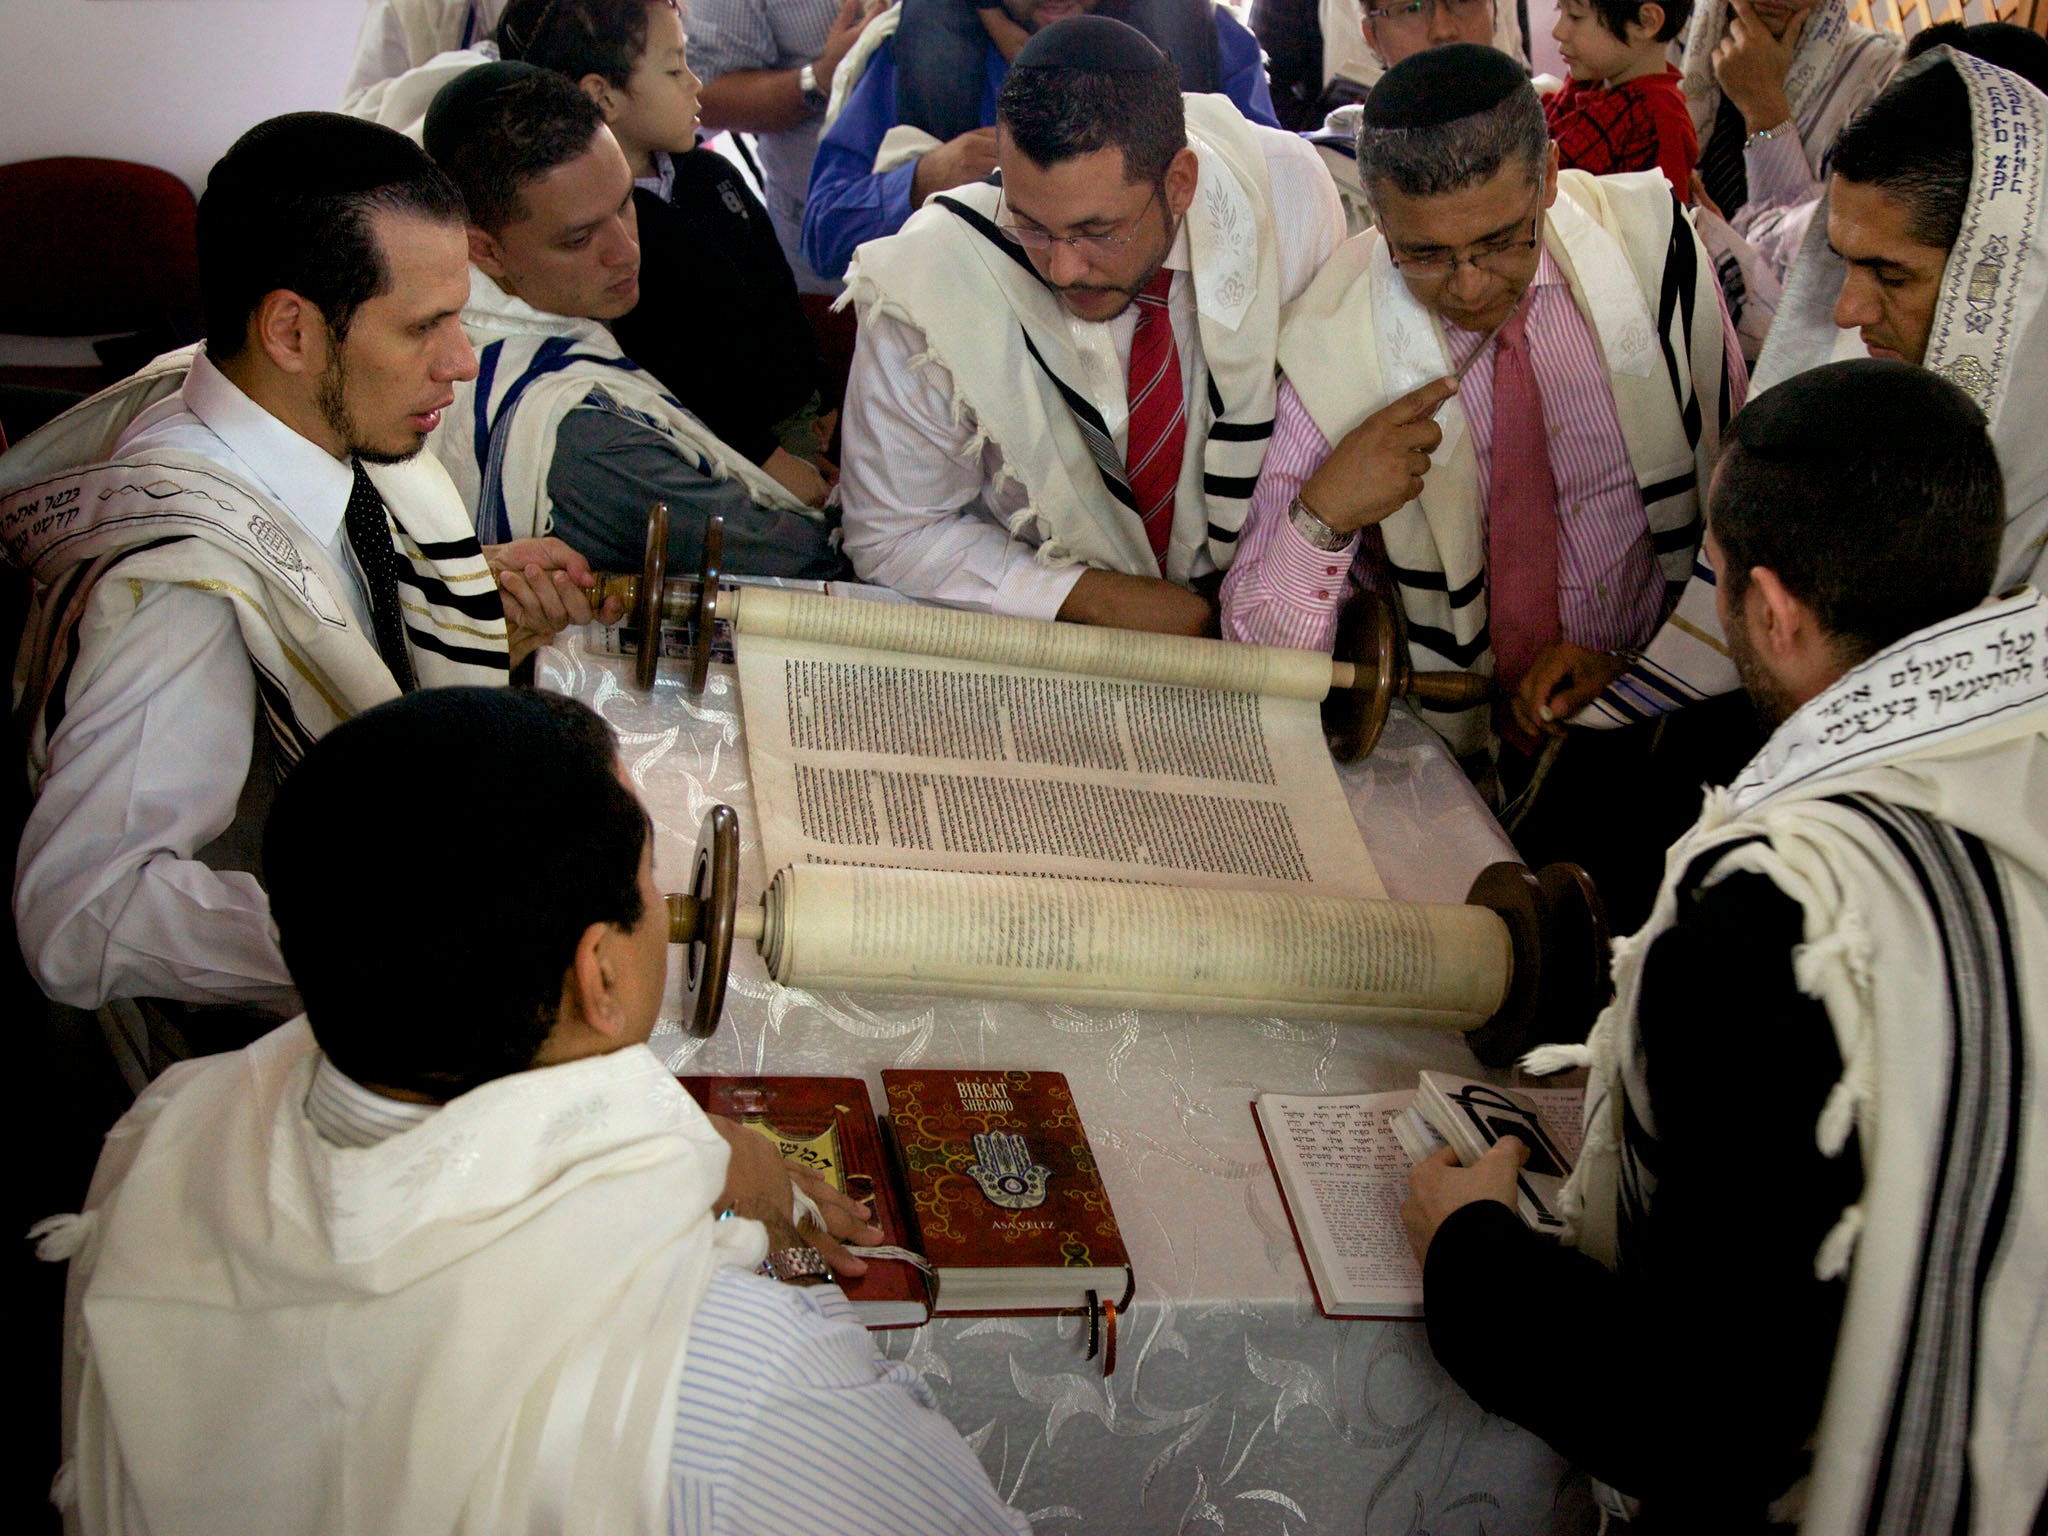 COLOMBIA: Members of the Jewish congregation in Bello, Colombia gather round a 120-year-old Torah scroll written in Amsterdam and obtained by the community five years ago.